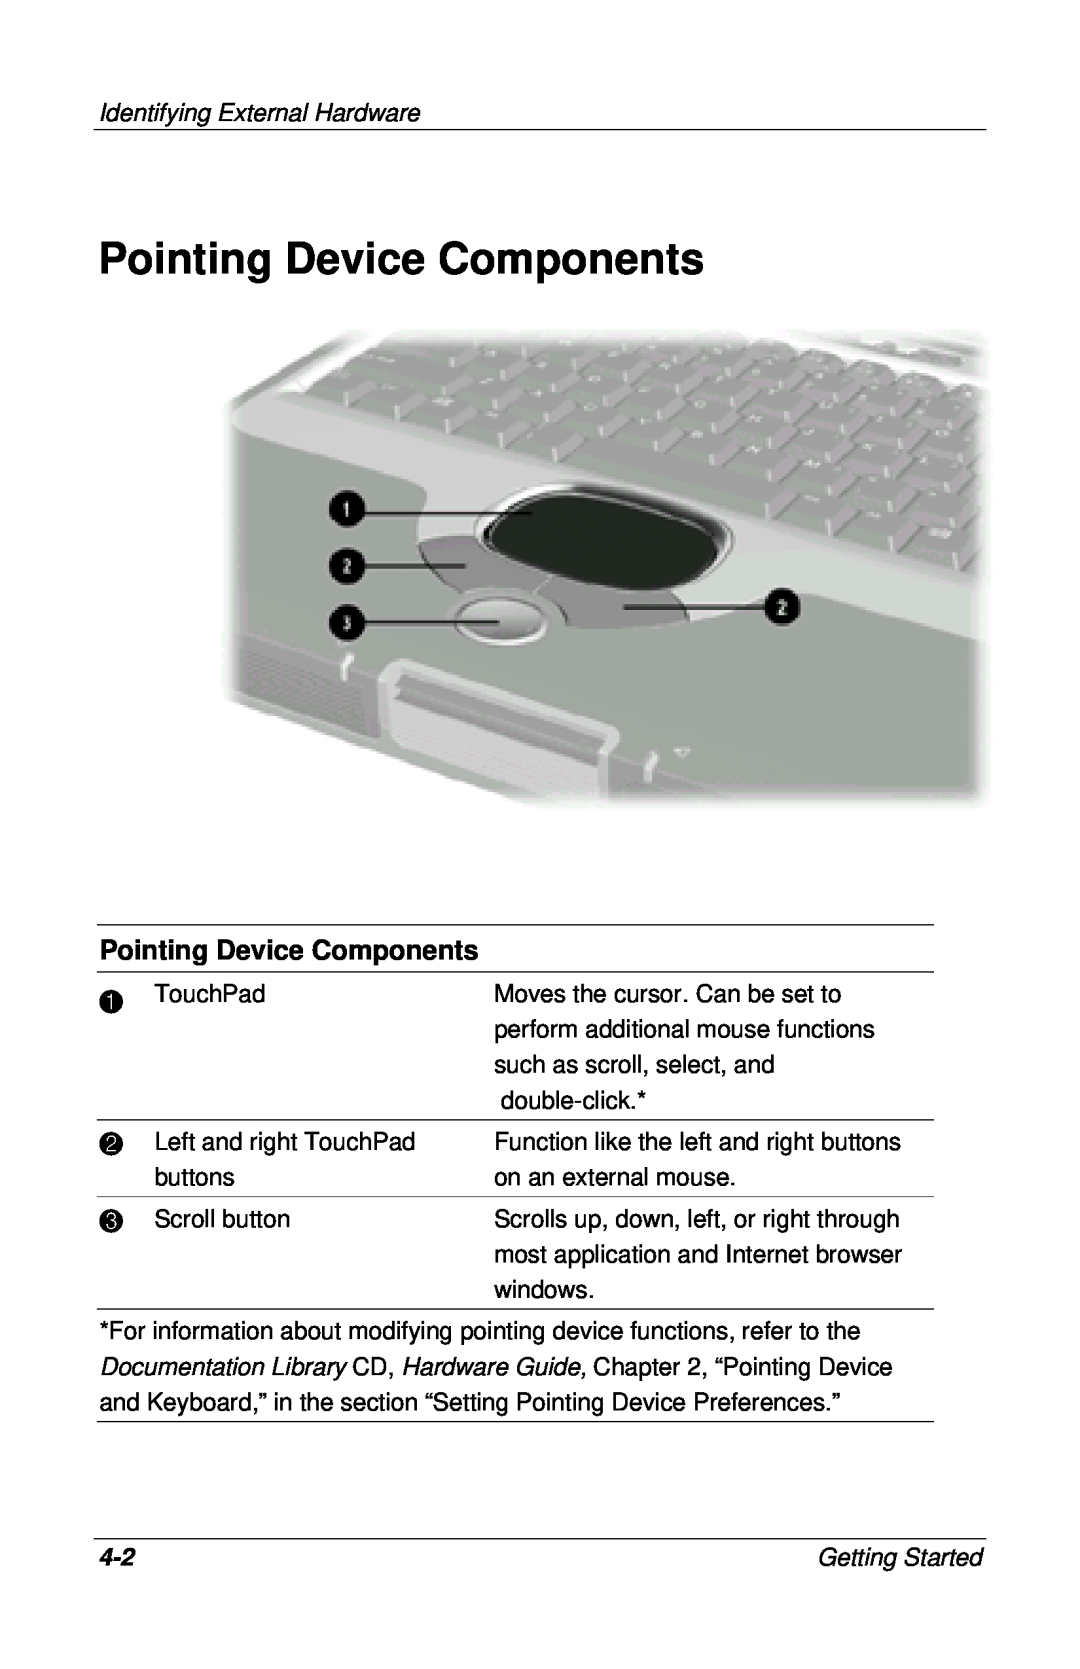 HP 922UK, 955AP, 950AP, 943AP, 945AP, 940AP, 935AP, 927AP, 930AP, 925EA, 923AP, 908EA Pointing Device Components, Getting Started 